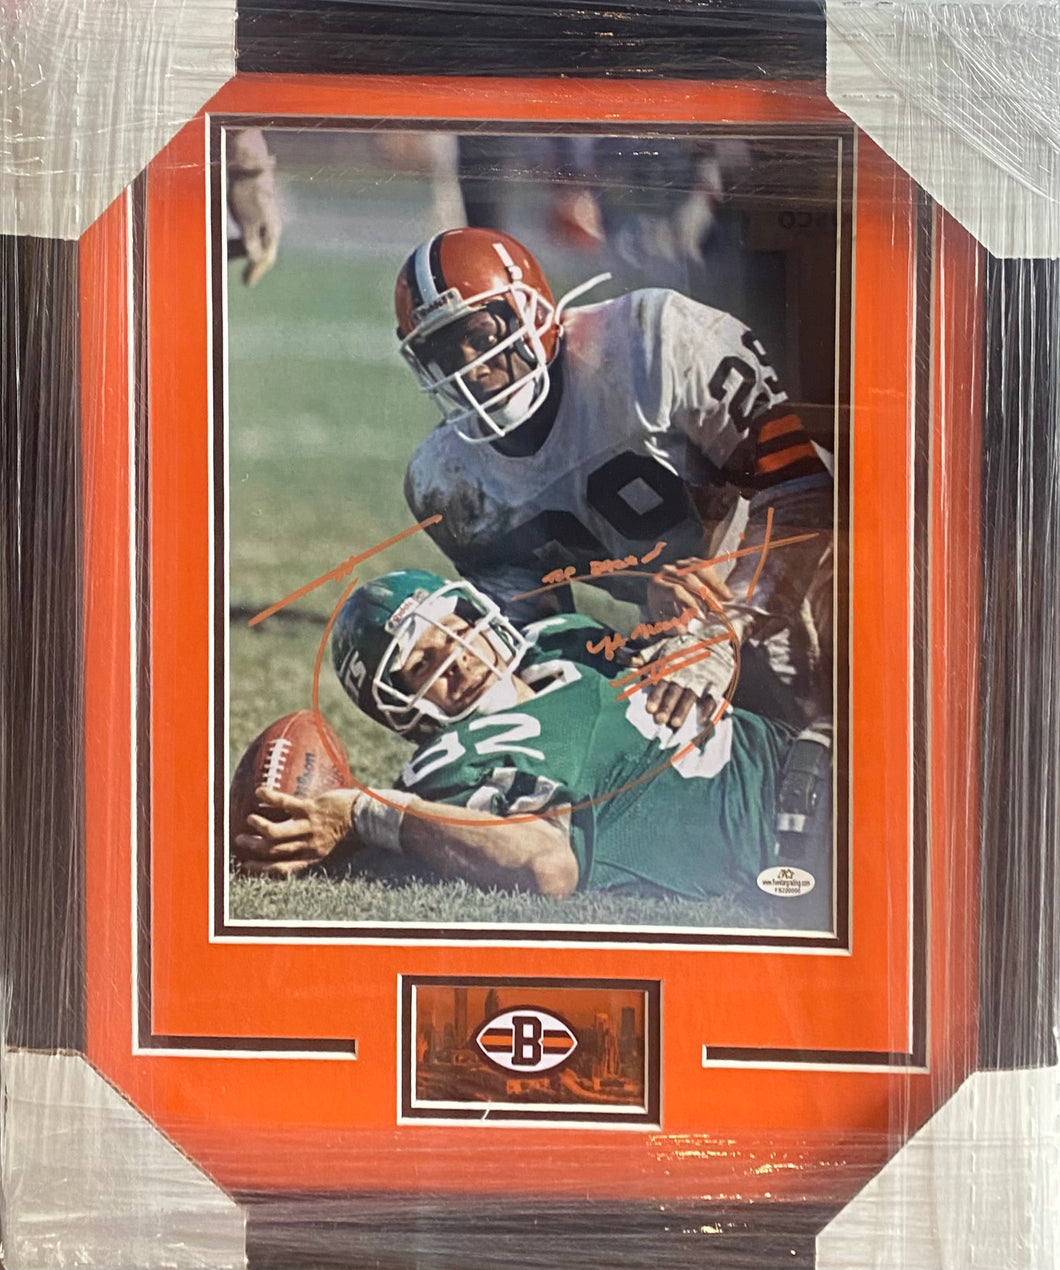 Cleveland Browns Hanford Dixon Signed with Inscriptions (In Orange) 11x14 Photo Framed & Matted with COA